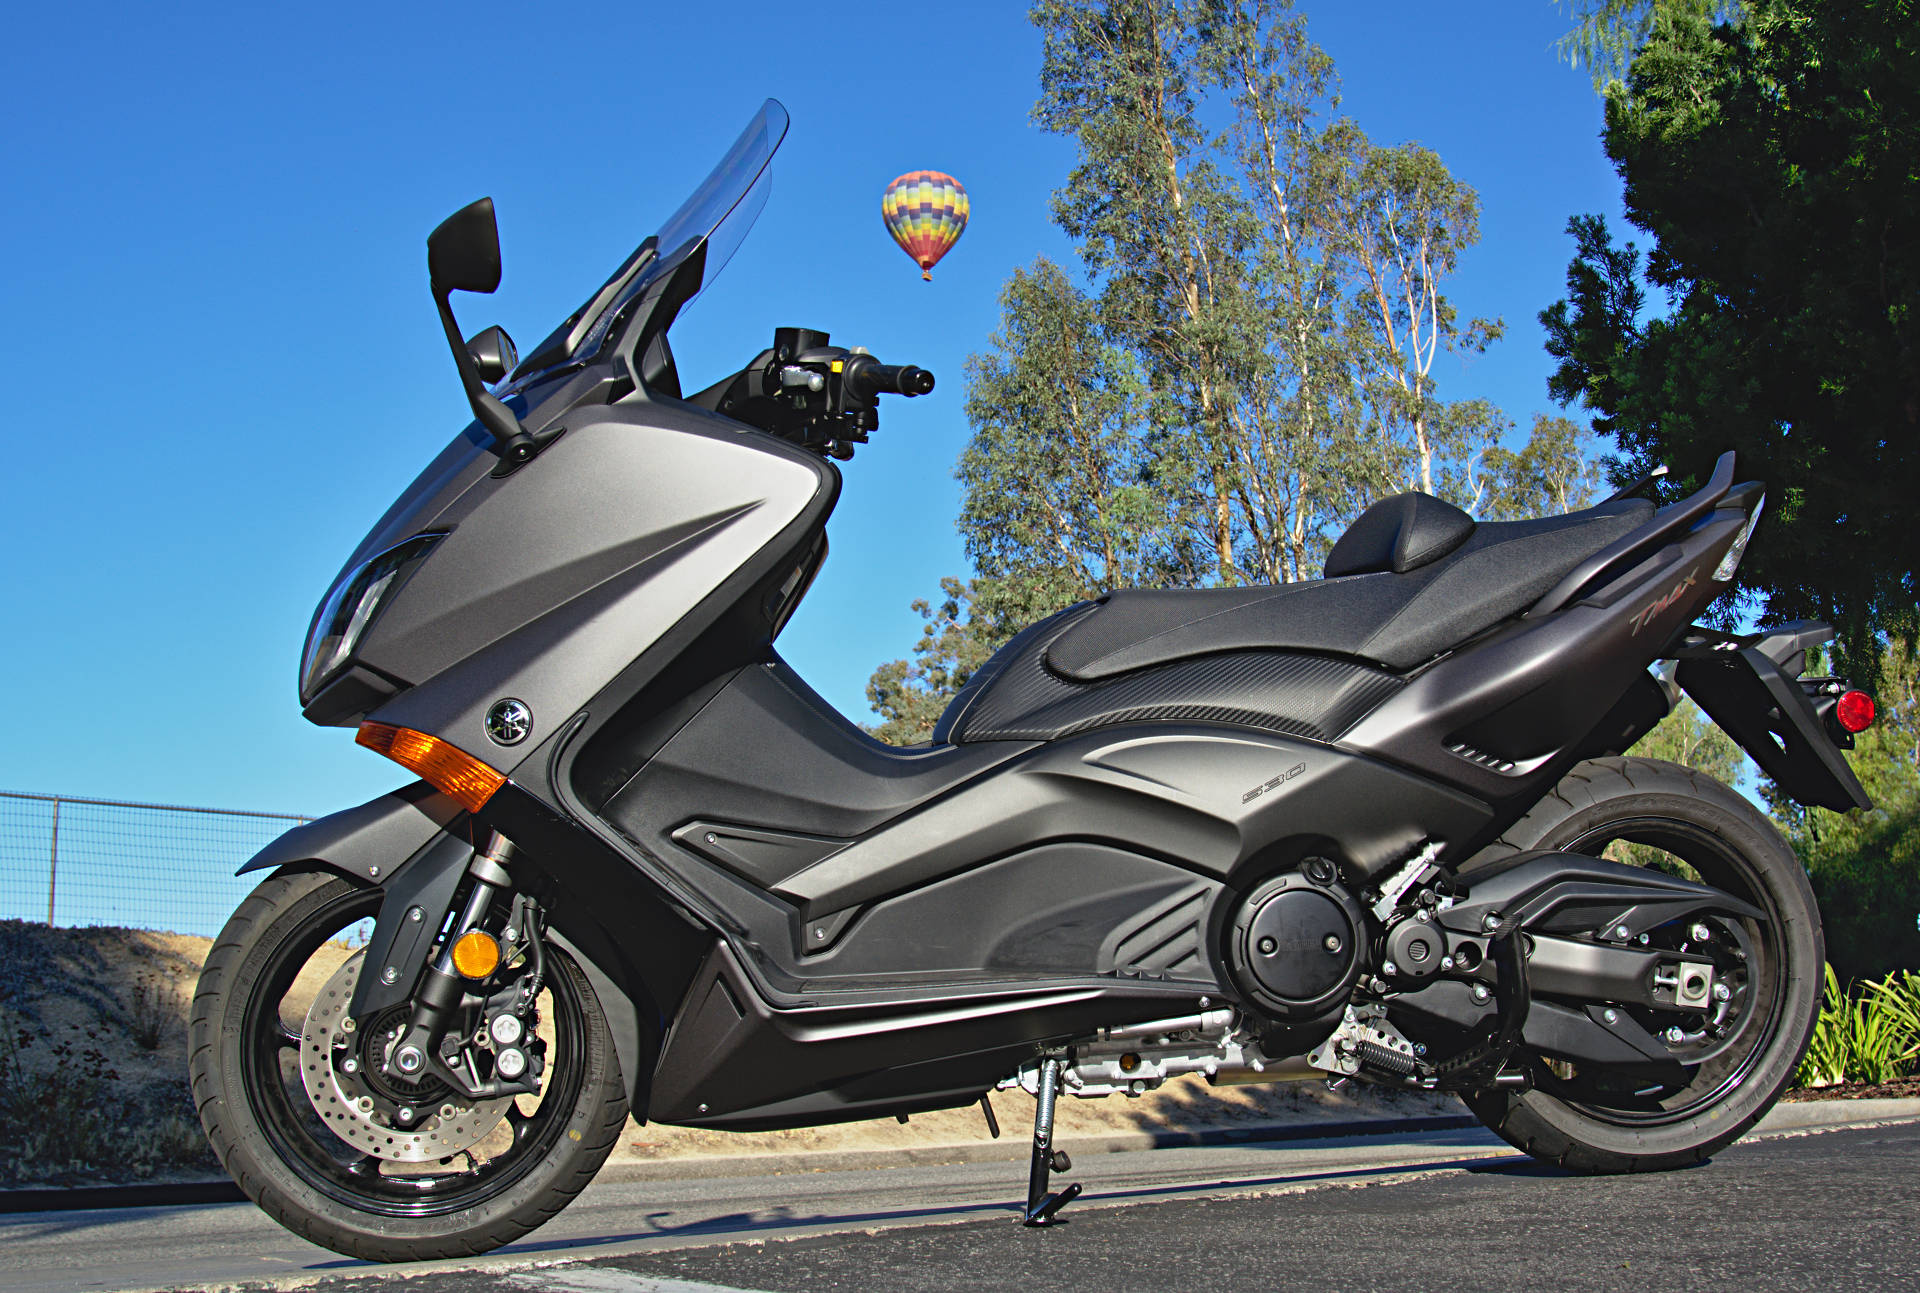 Yamaha TMAX, MD ride review, Motorcycle News, Product Reviews, 1920x1300 HD Desktop